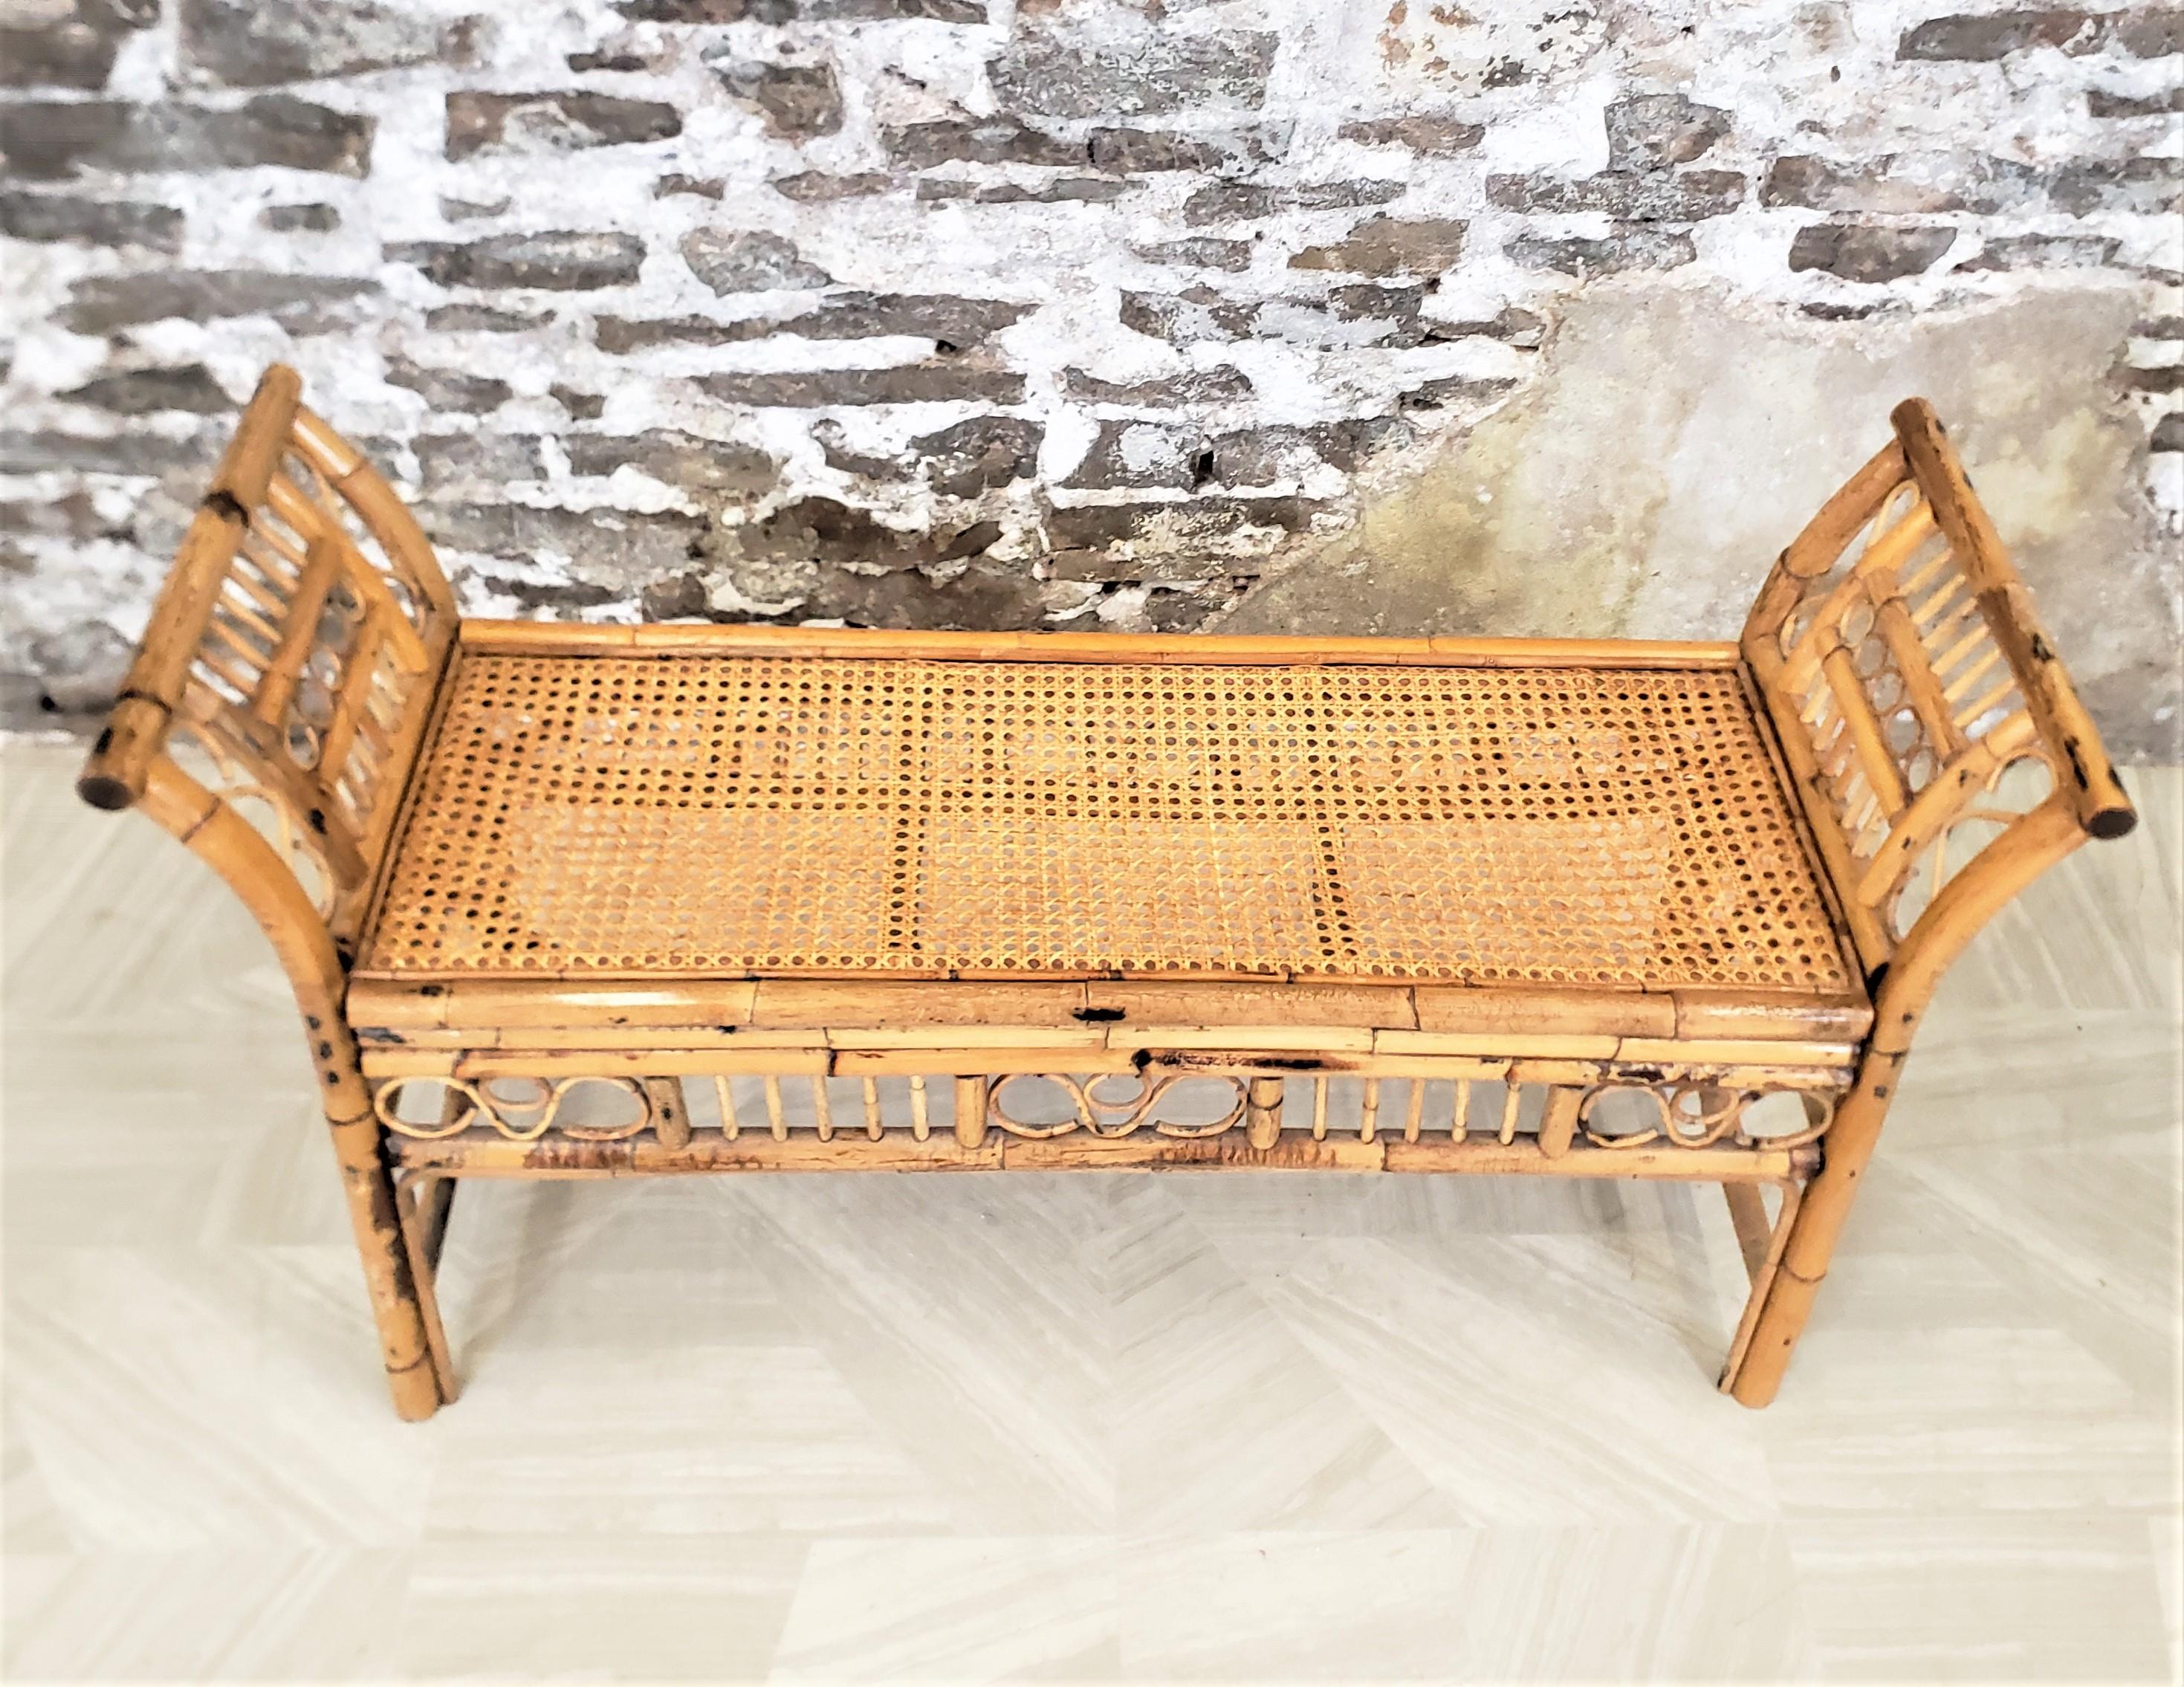 Antique Art Deco Rattan Bohemian Styled Bench with Cushion & Bolsters For Sale 3